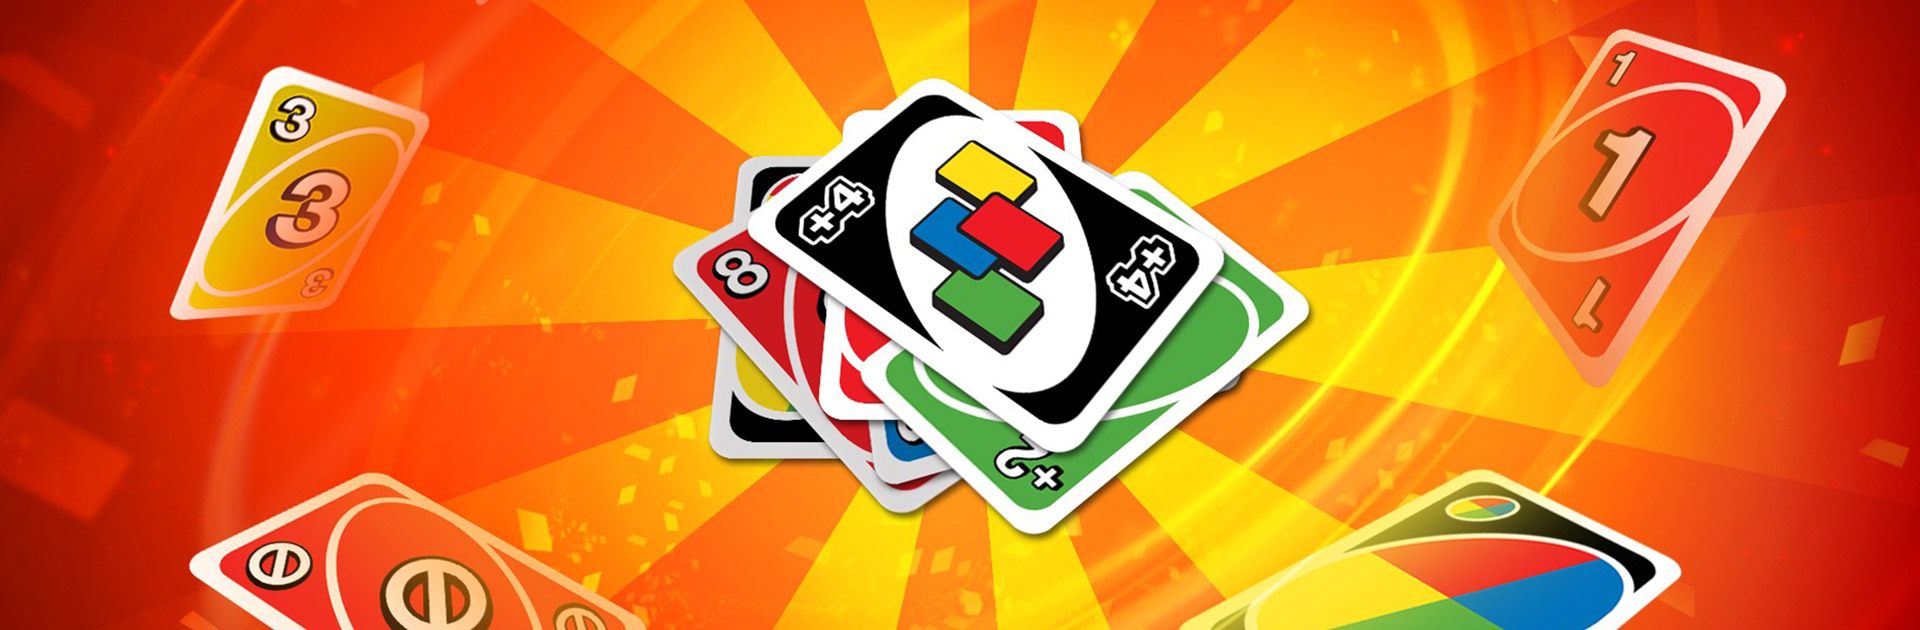 Play Uno Online For Free On Pc Mobile Now Gg